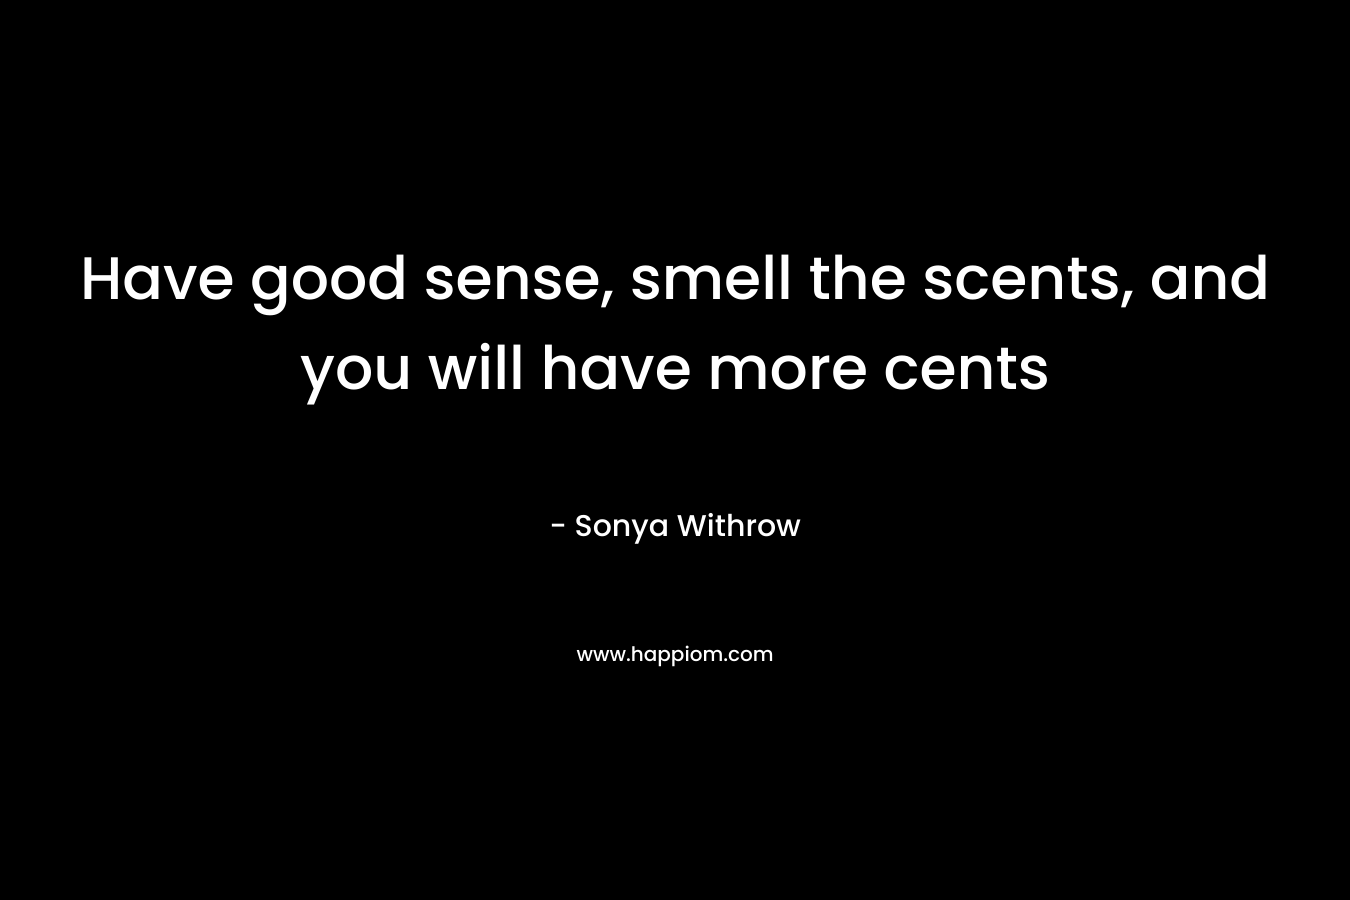 Have good sense, smell the scents, and you will have more cents